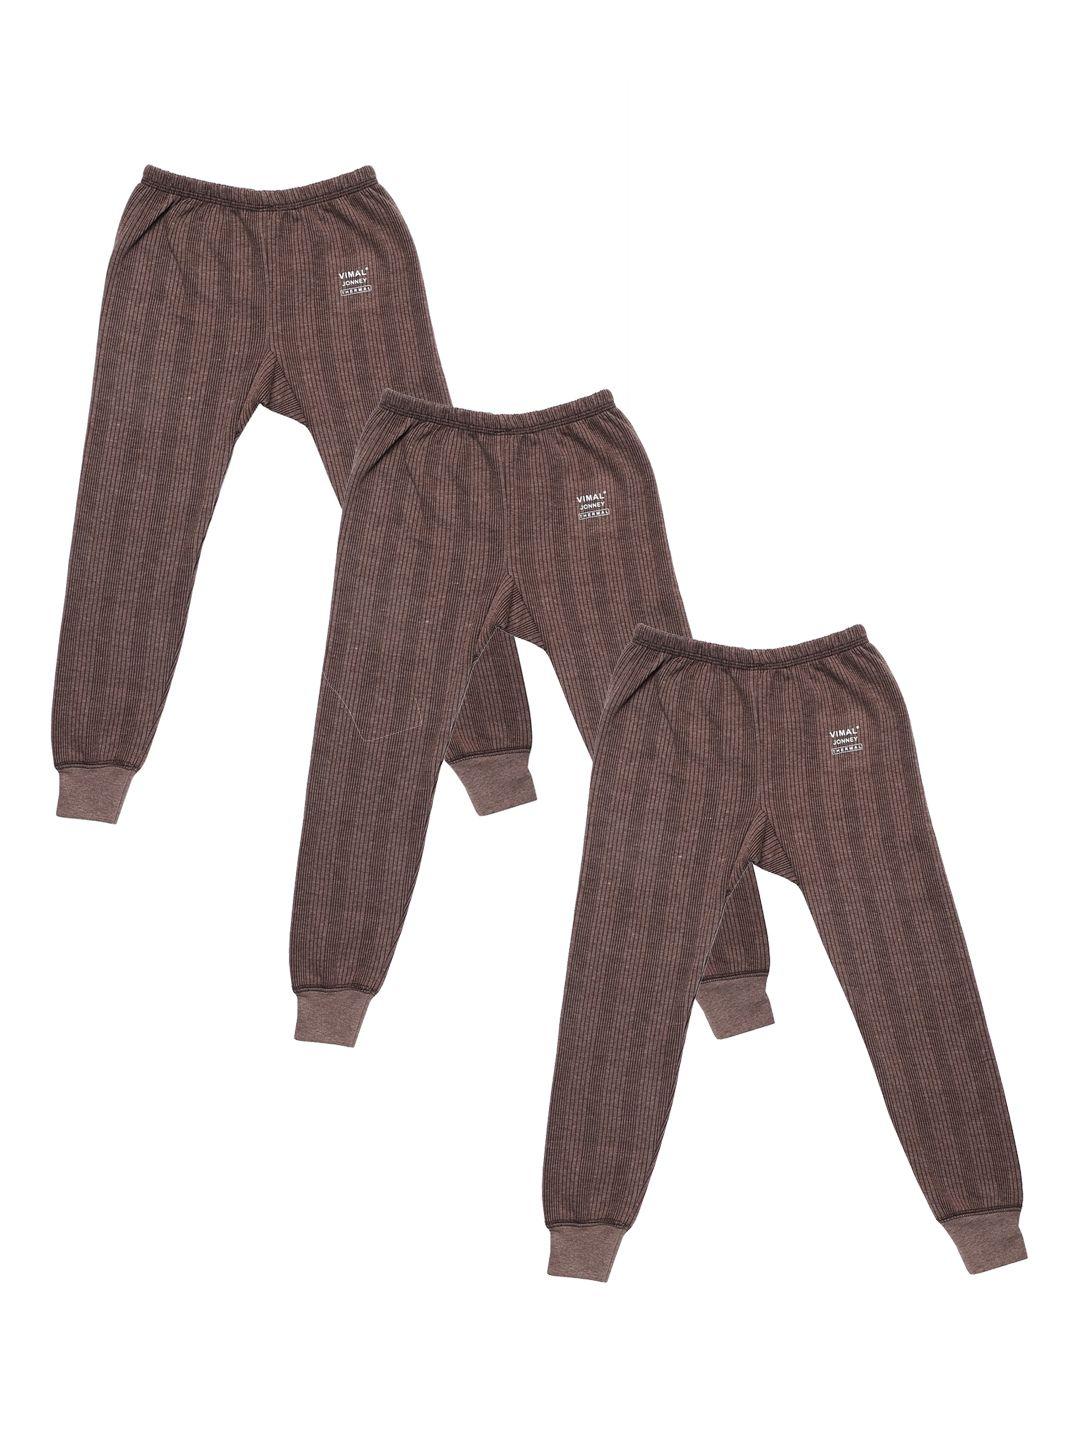 vimal jonney infant unisex kids pack of 3 brown striped cotton thermal bottoms